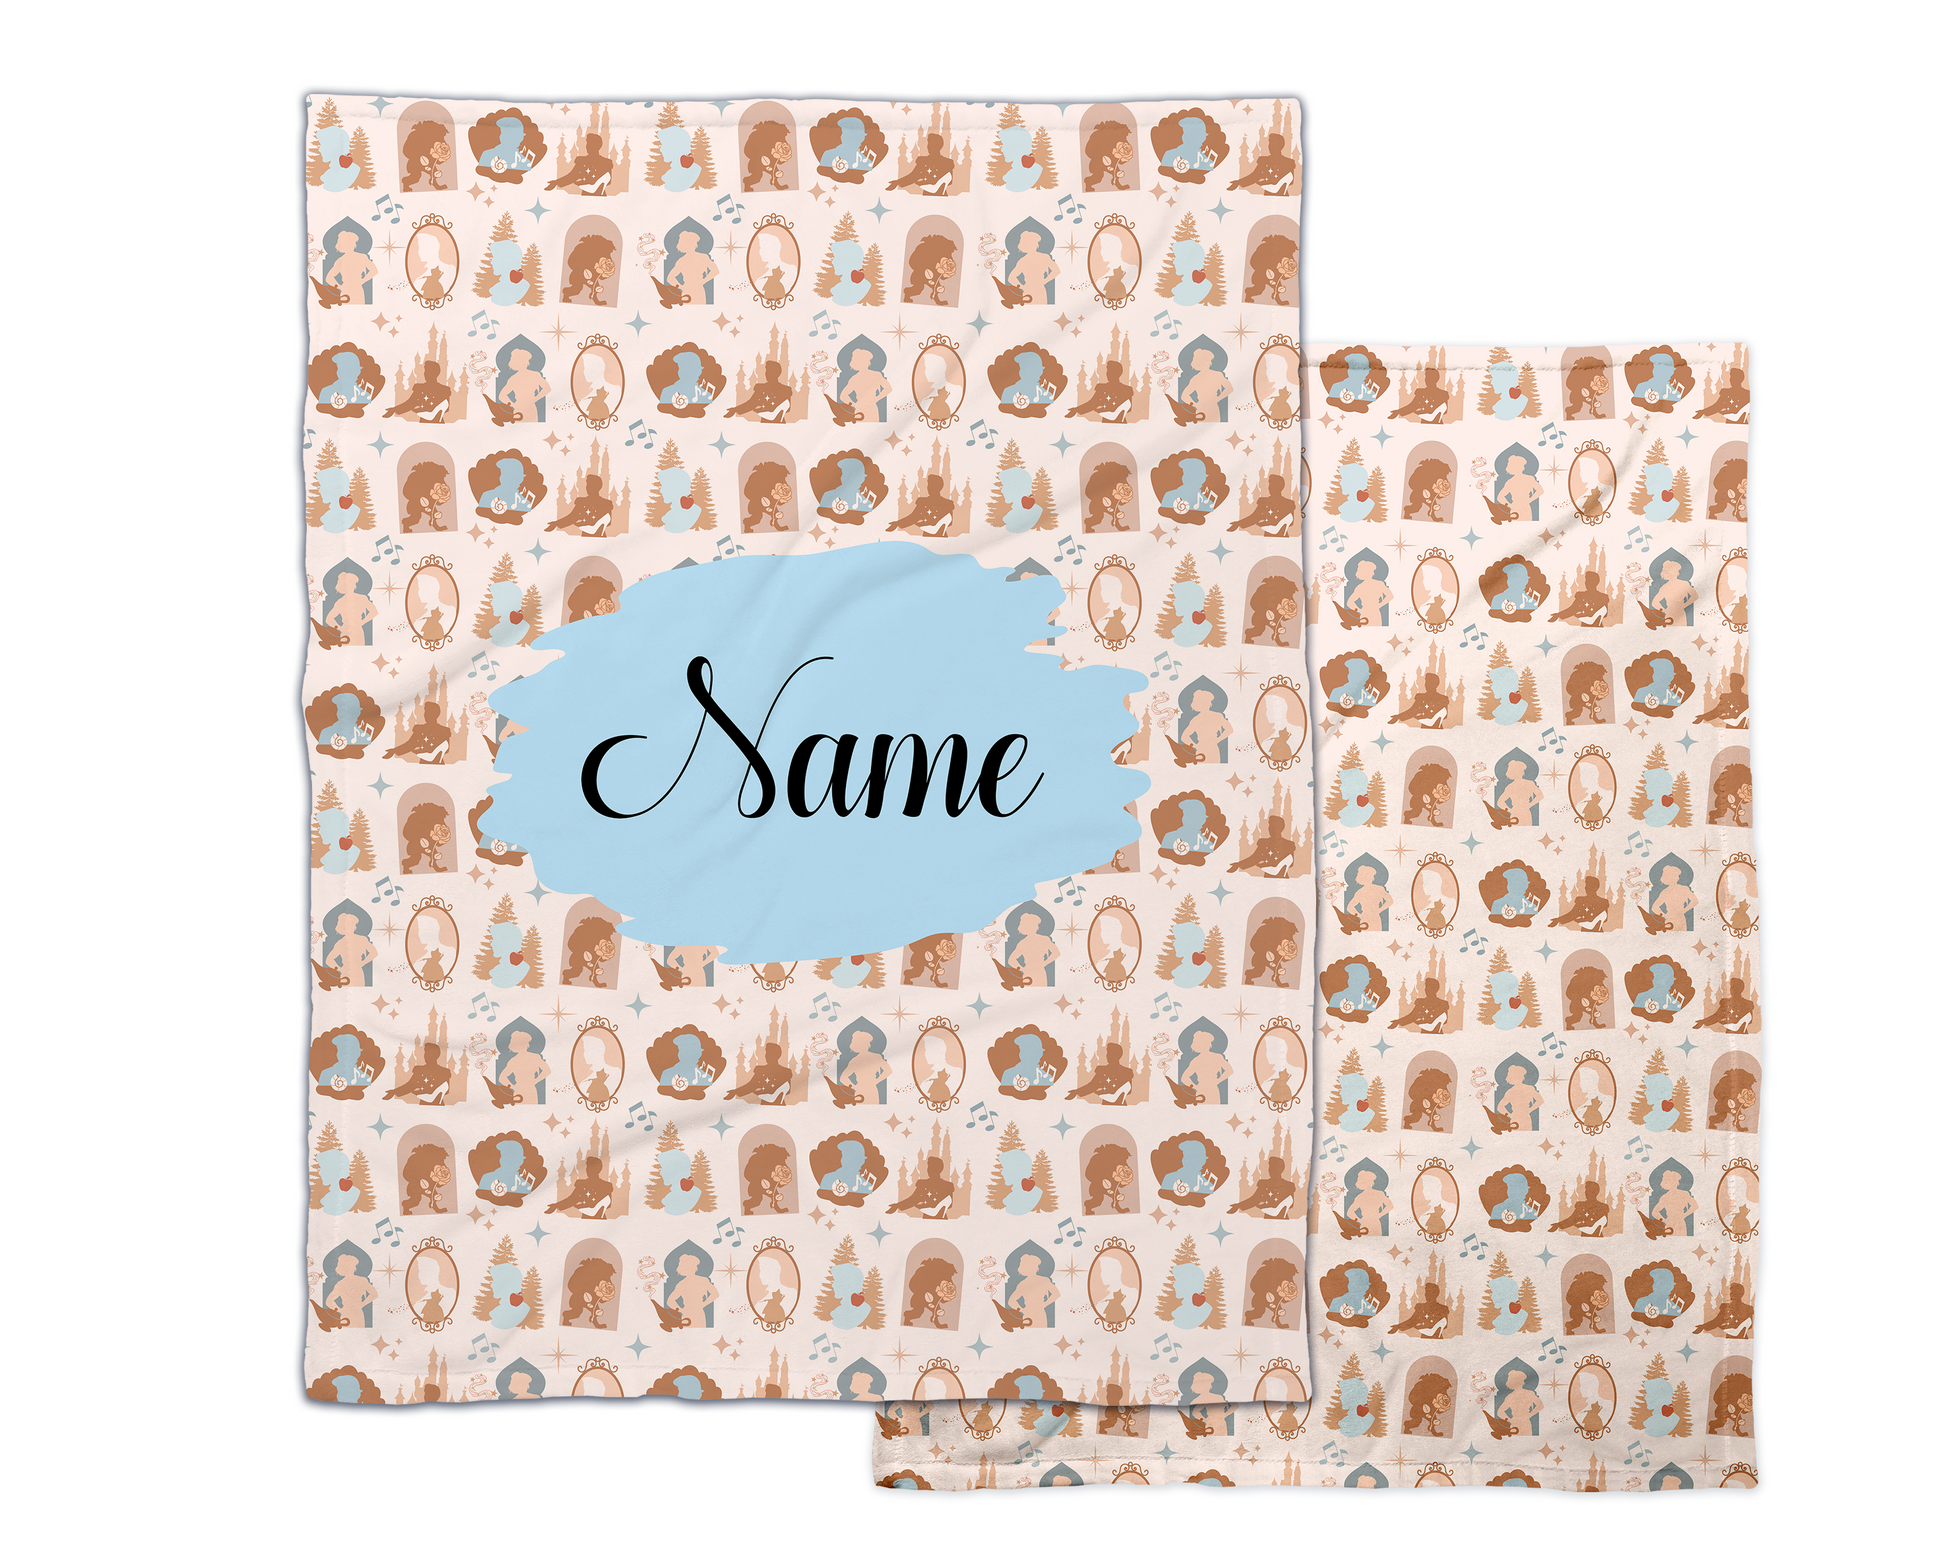 Personalized Minky Blanket with Prince Silhouettes - Blue and Brown Neutral Prince Pattern 